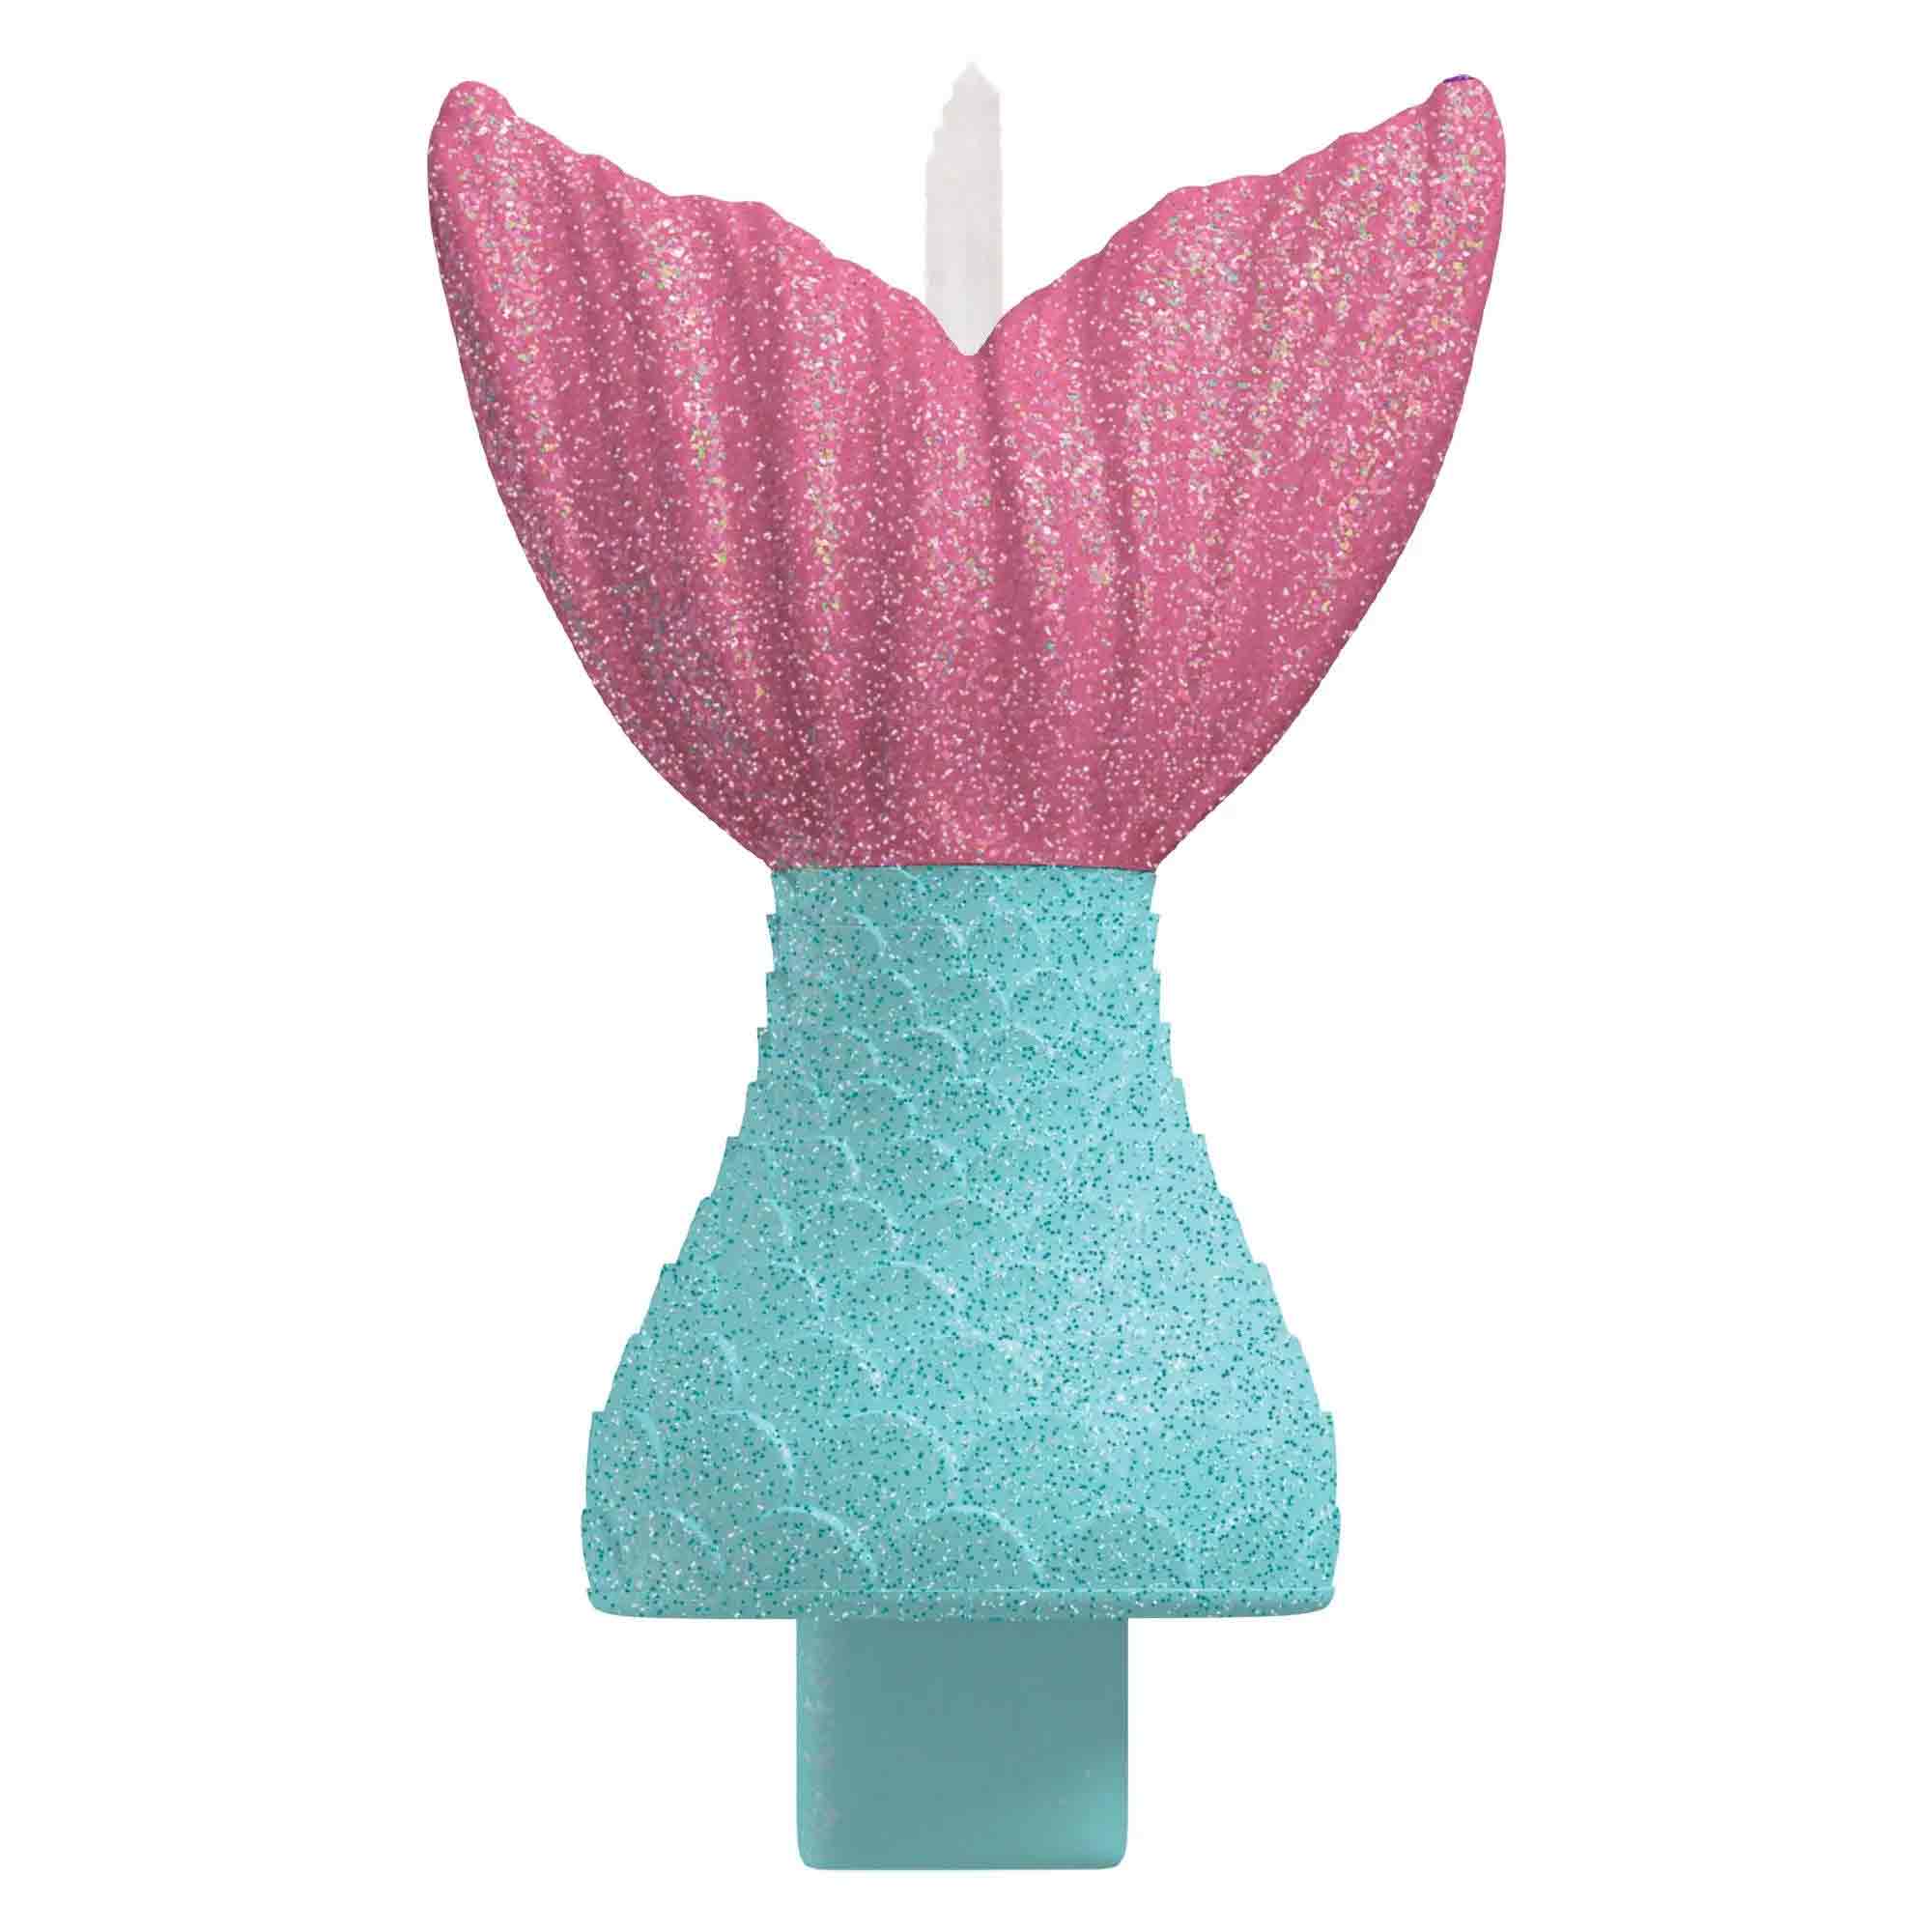 Shimmering Mermaids Tail Birthday Candle with Glitter